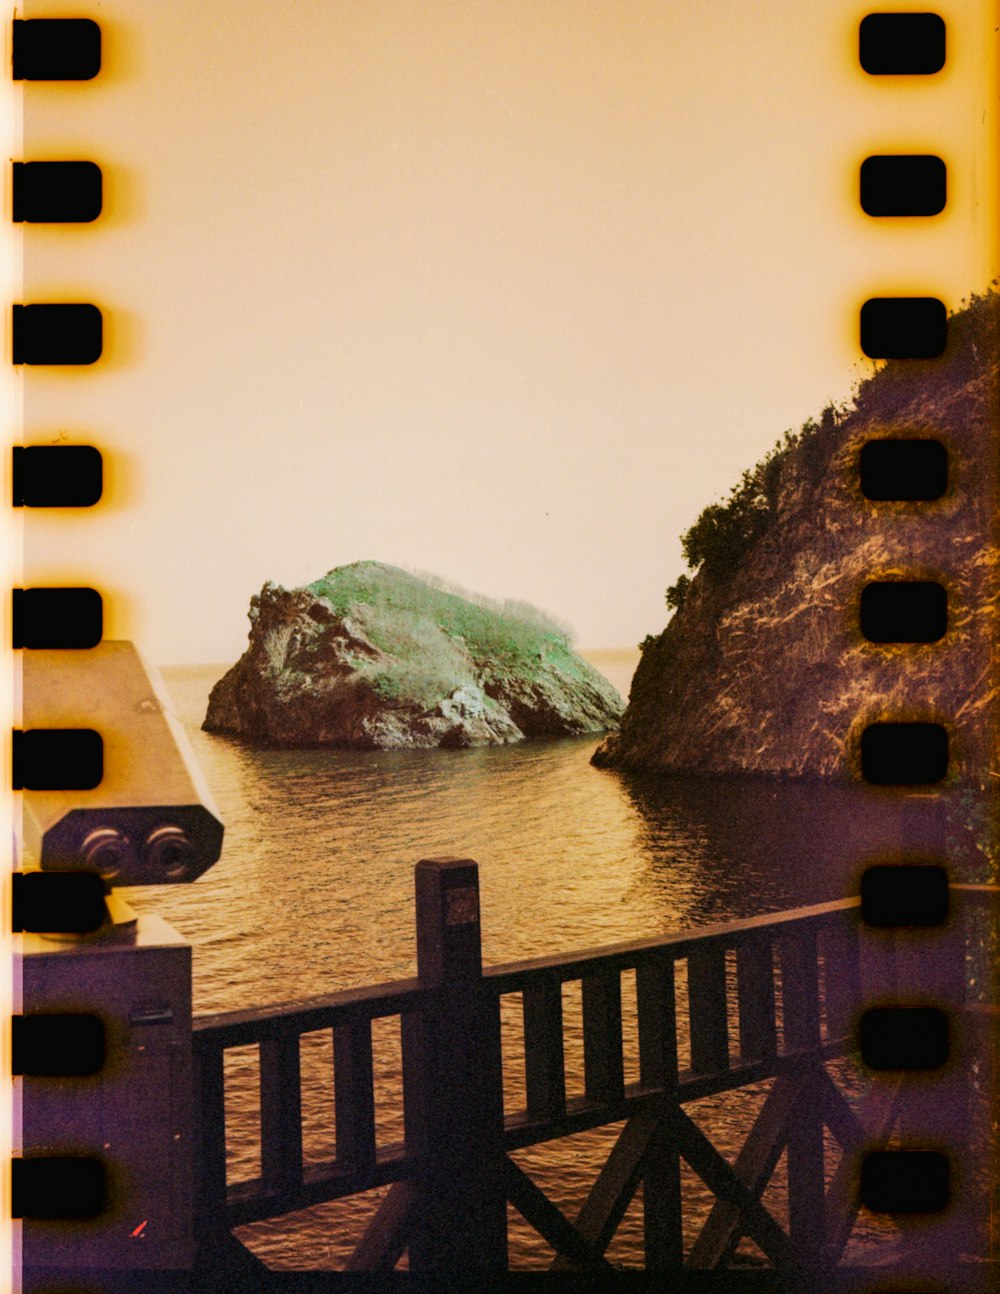 a polaroid photo of a rock in the water